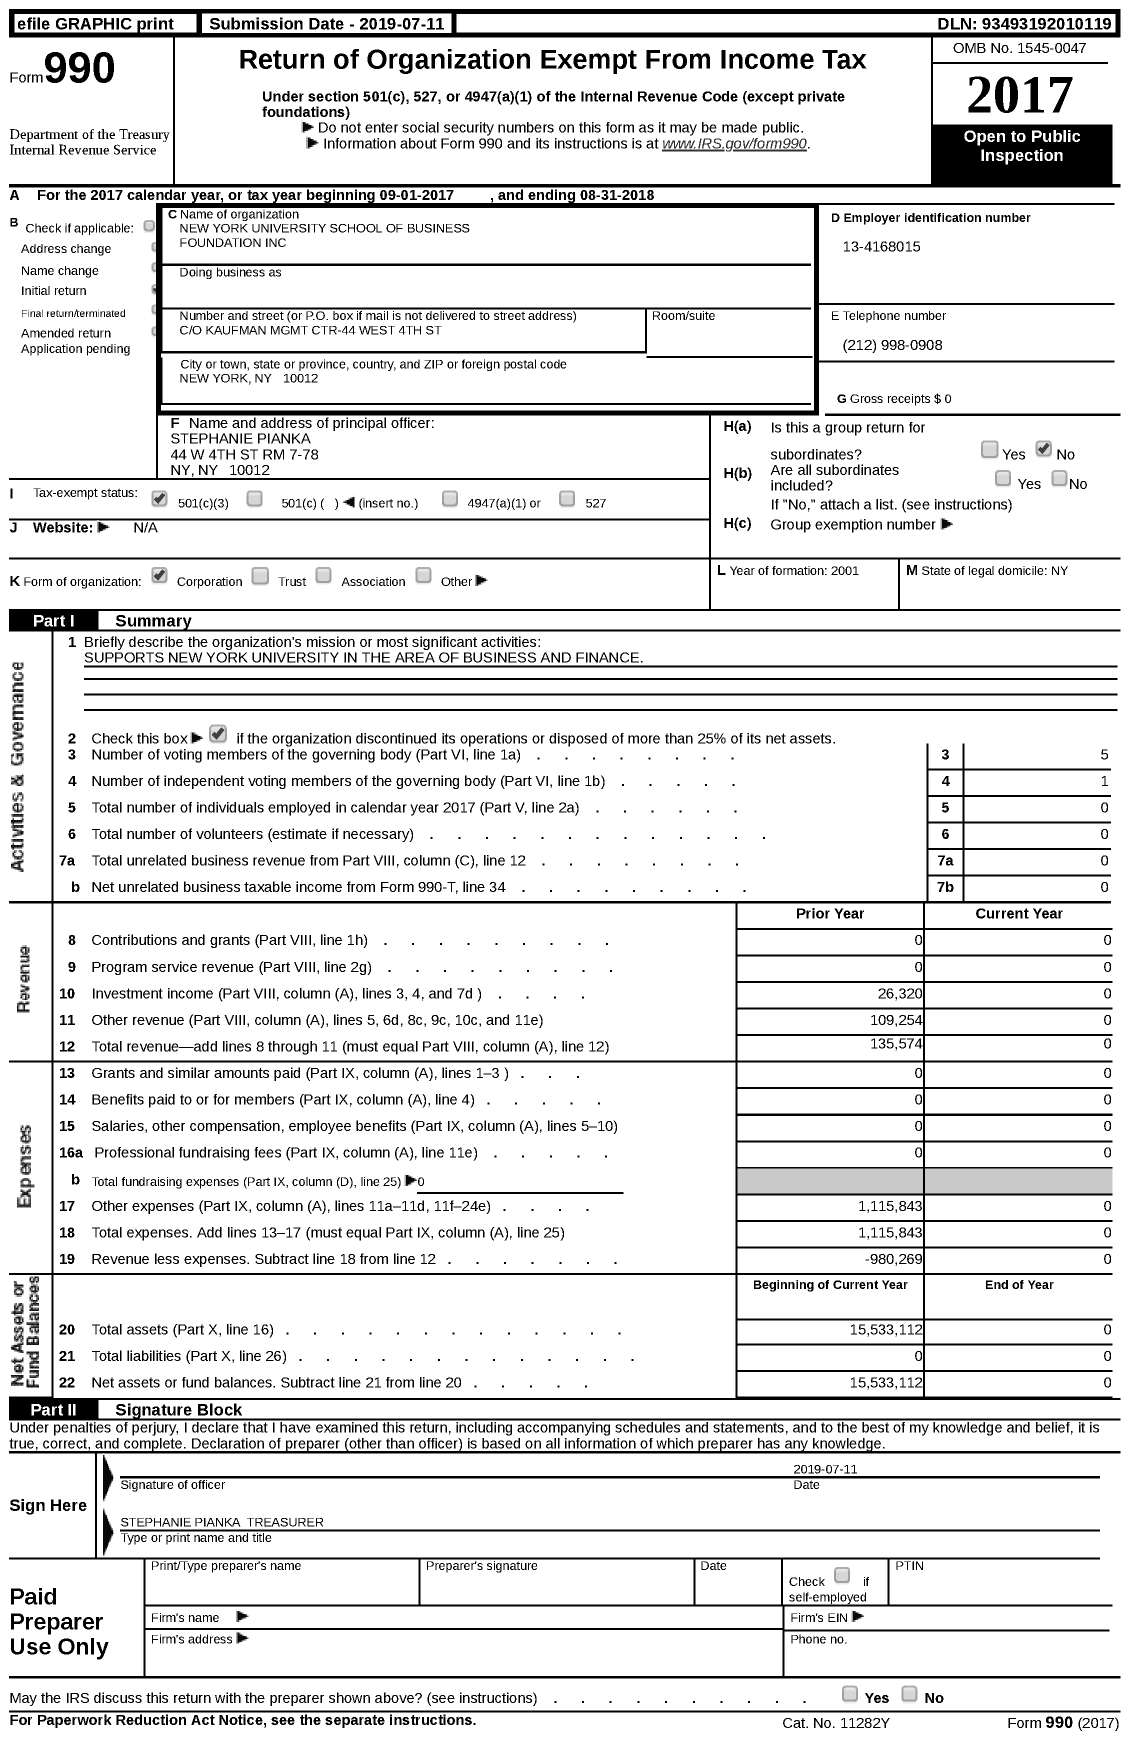 Image of first page of 2017 Form 990 for New York University School of Business Foundation